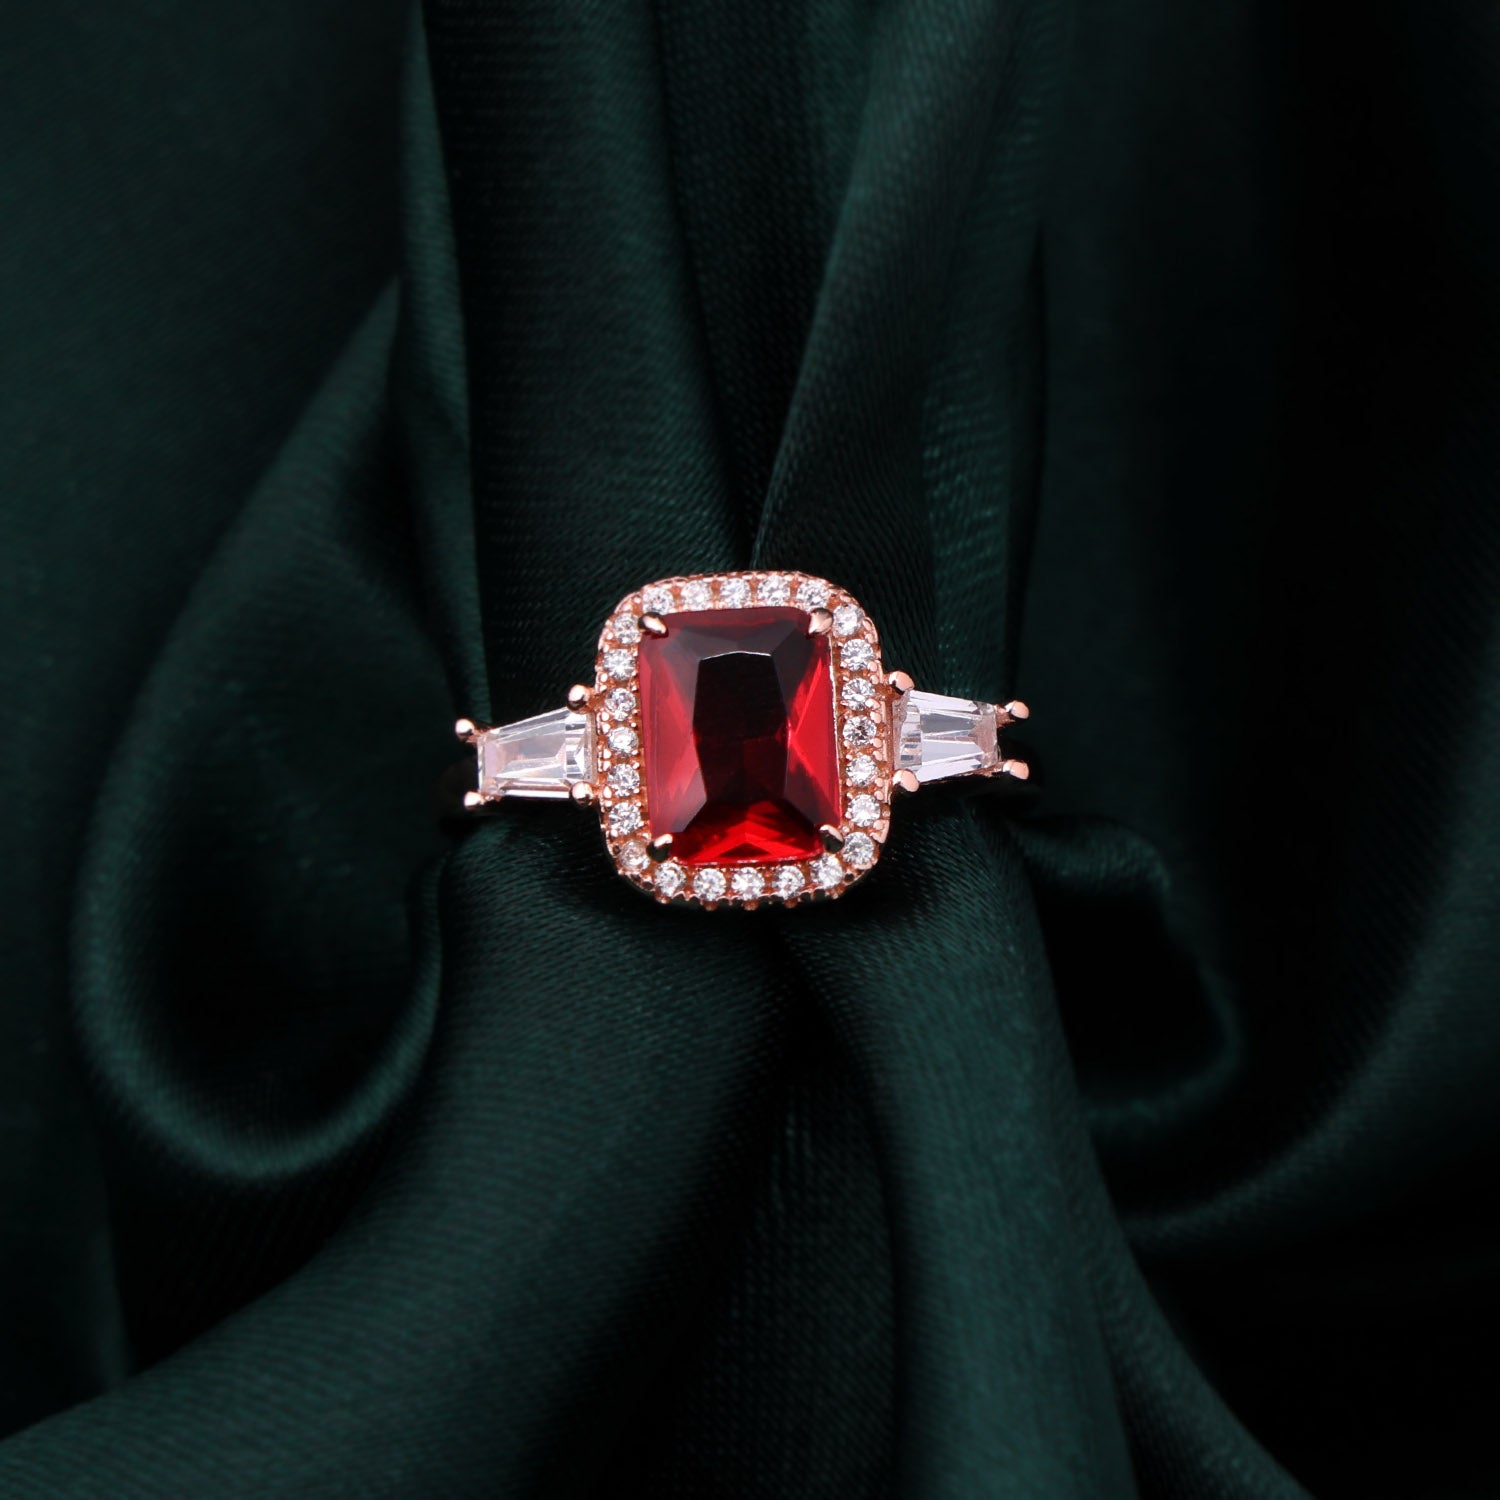 Red Stone Silver Ring | SKU: 0019211794